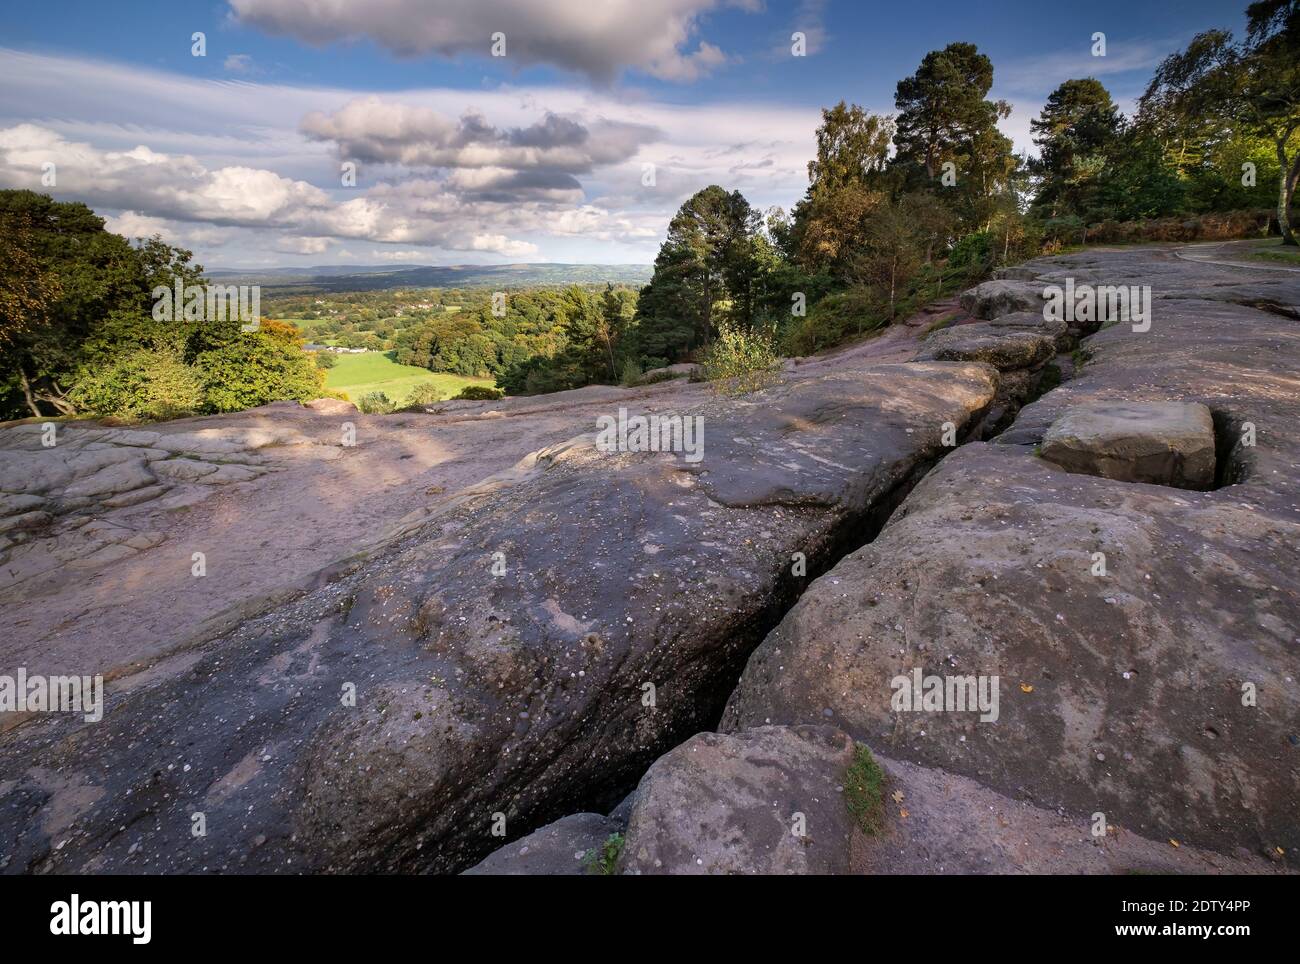 The Devils Grave and Stormy Point, Alderley Edge, Cheshire, England, UK Stock Photo